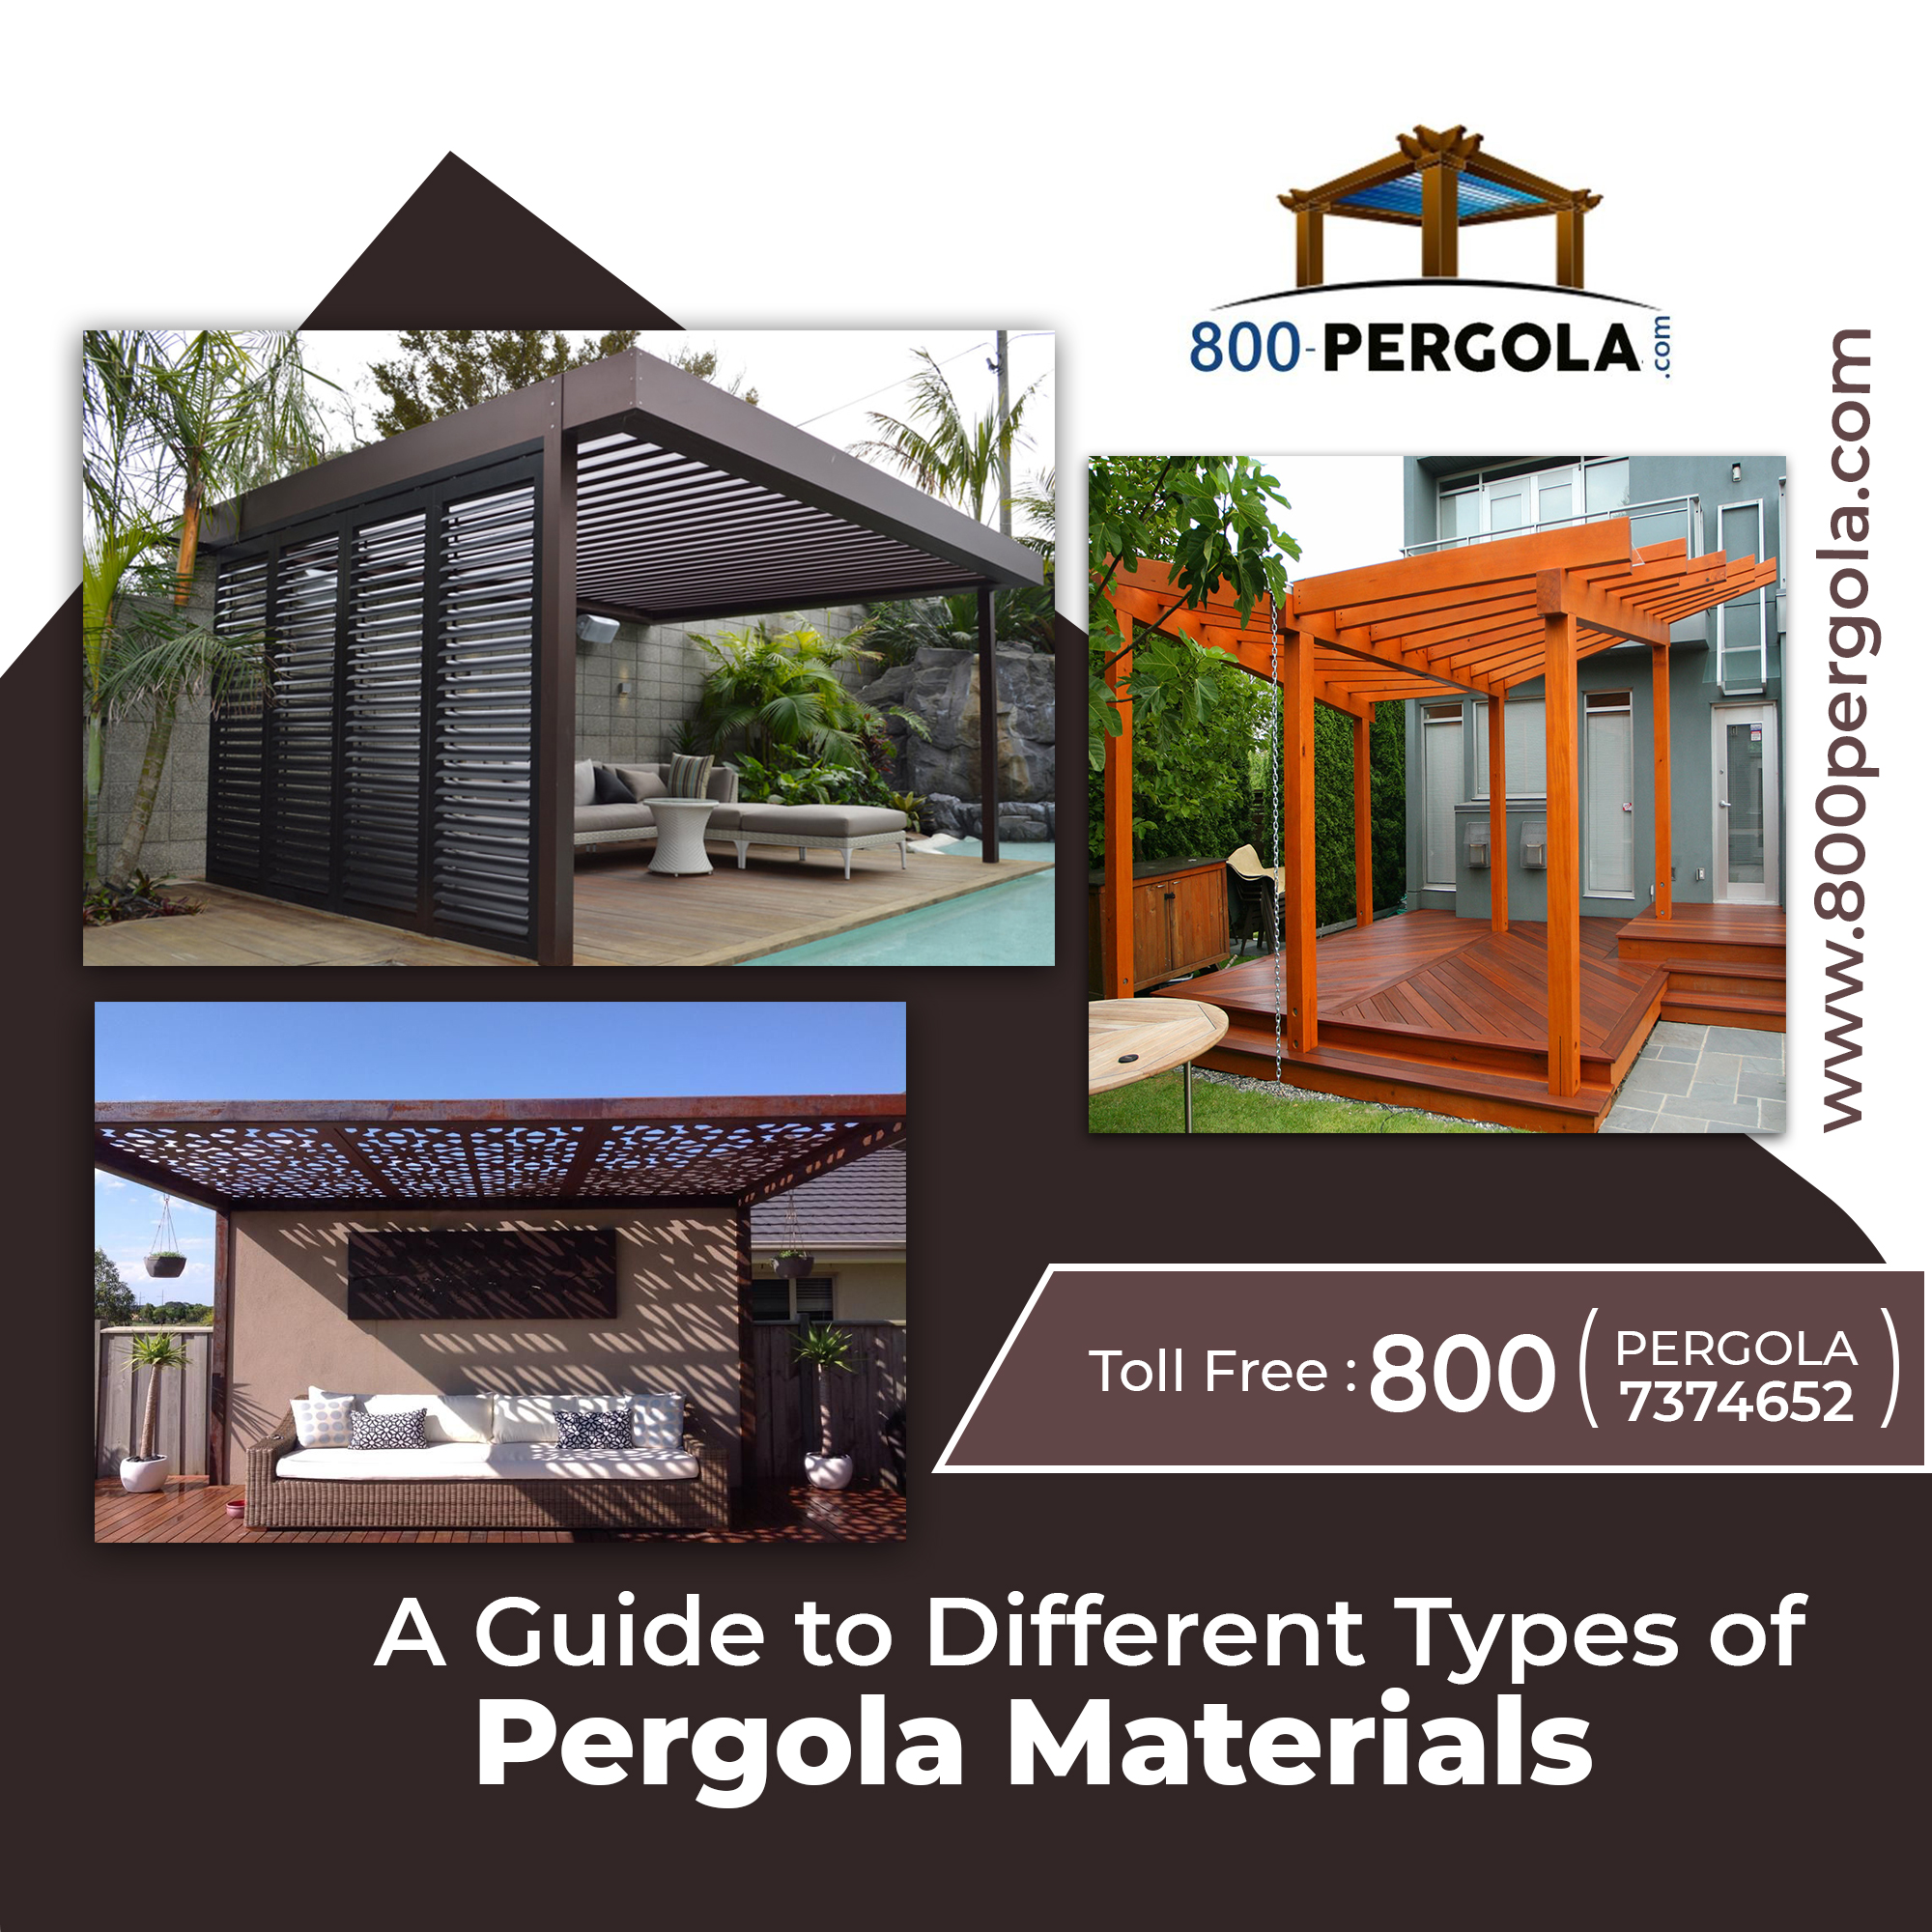 A Guide to Different Types of Pergola Materials